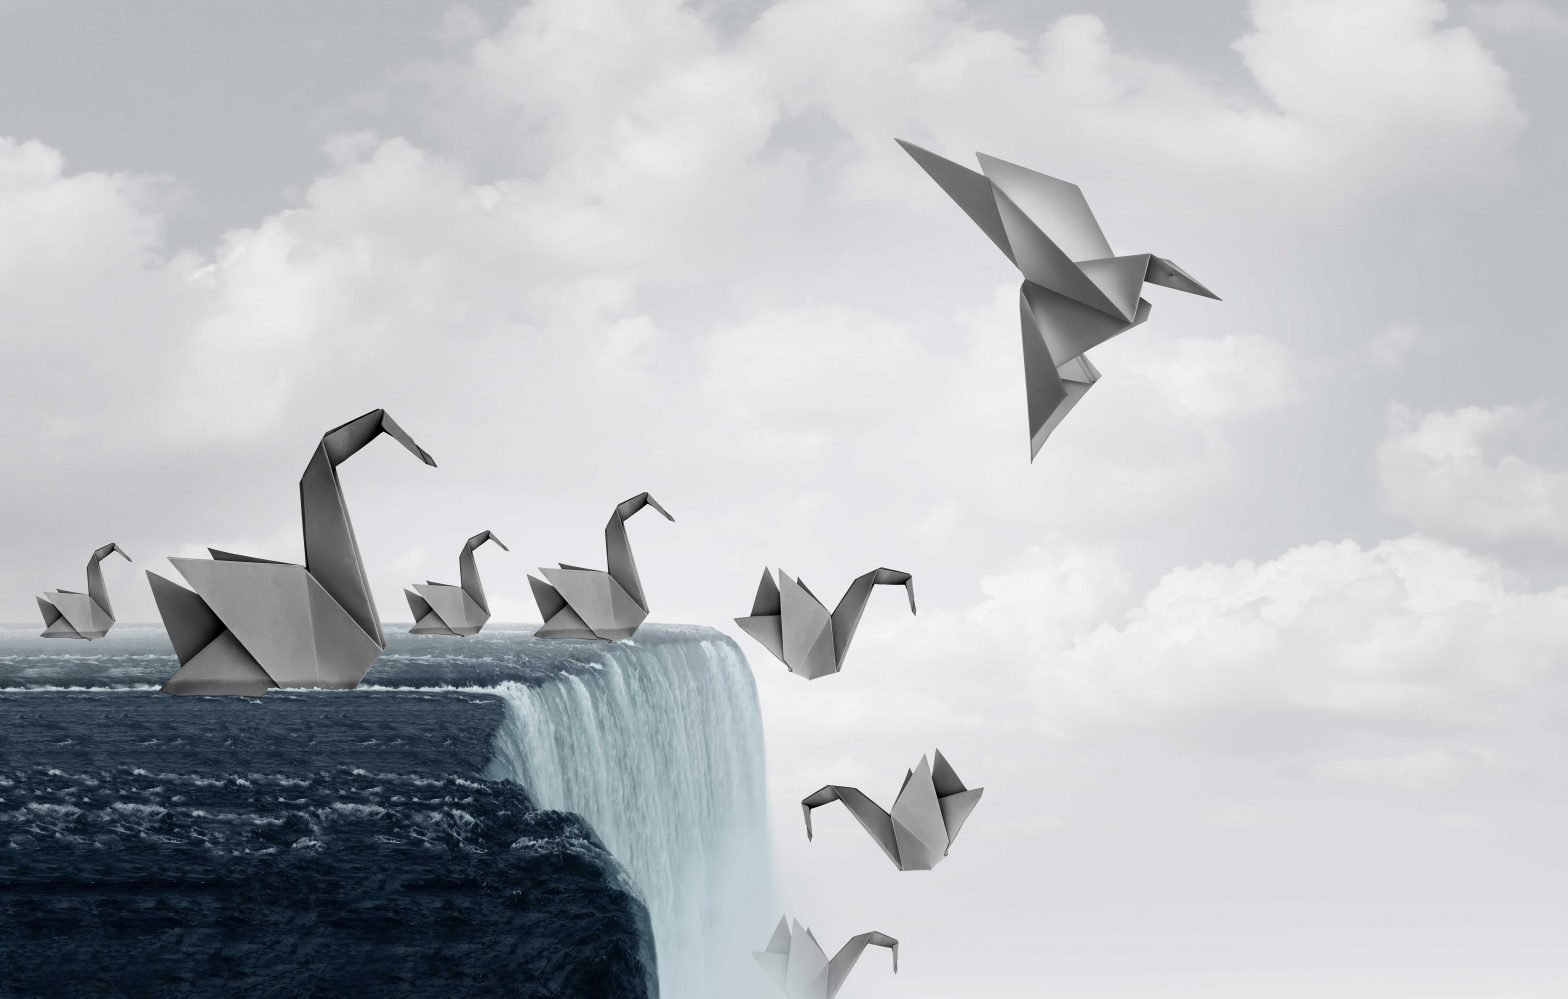 Origami swans at the edge of a waterfall. All but one swan is falling down. One swan has changed shape and flies off into the air.